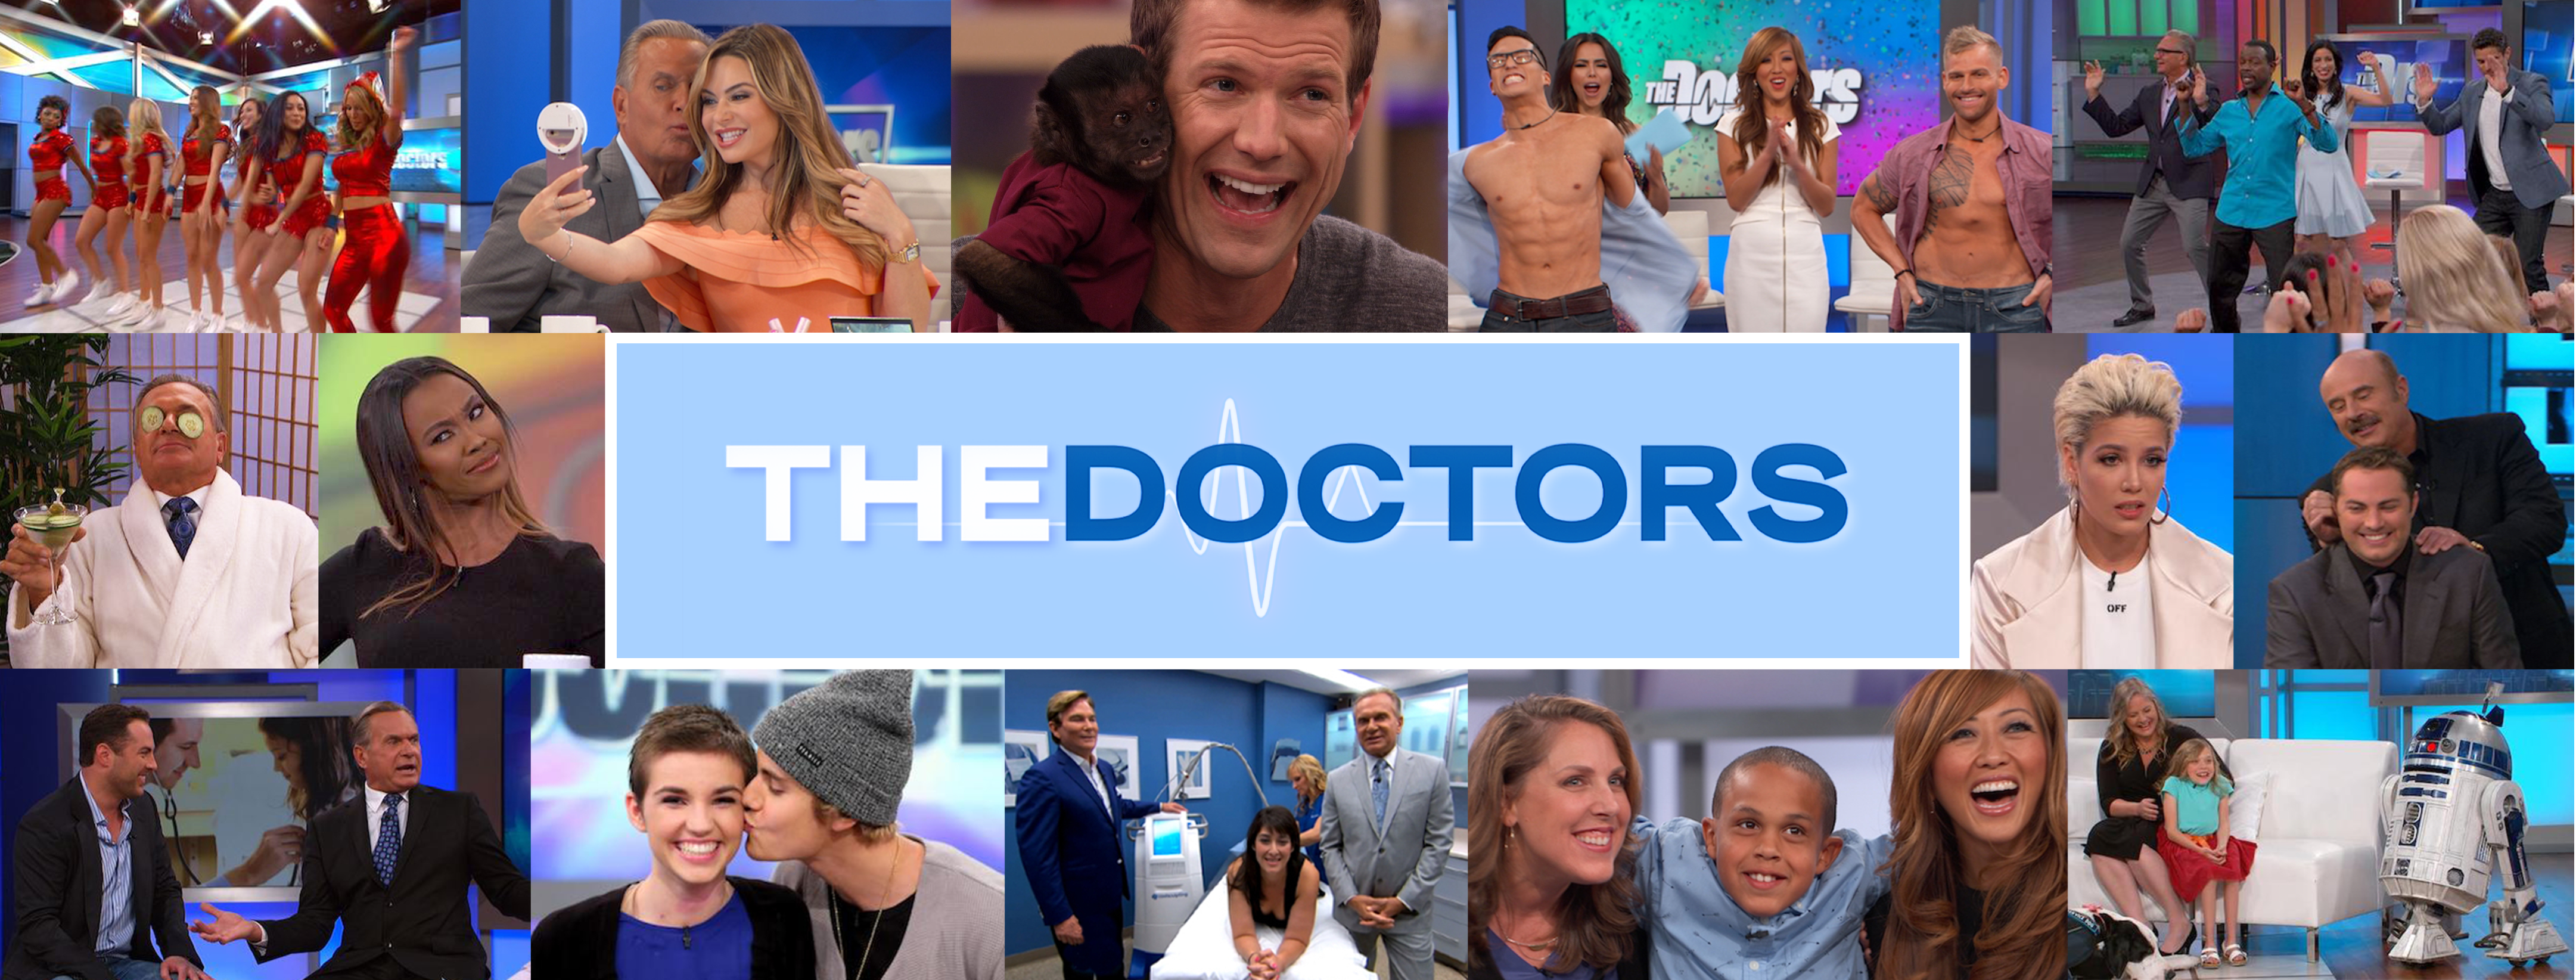 The Doctors try on VR goggles